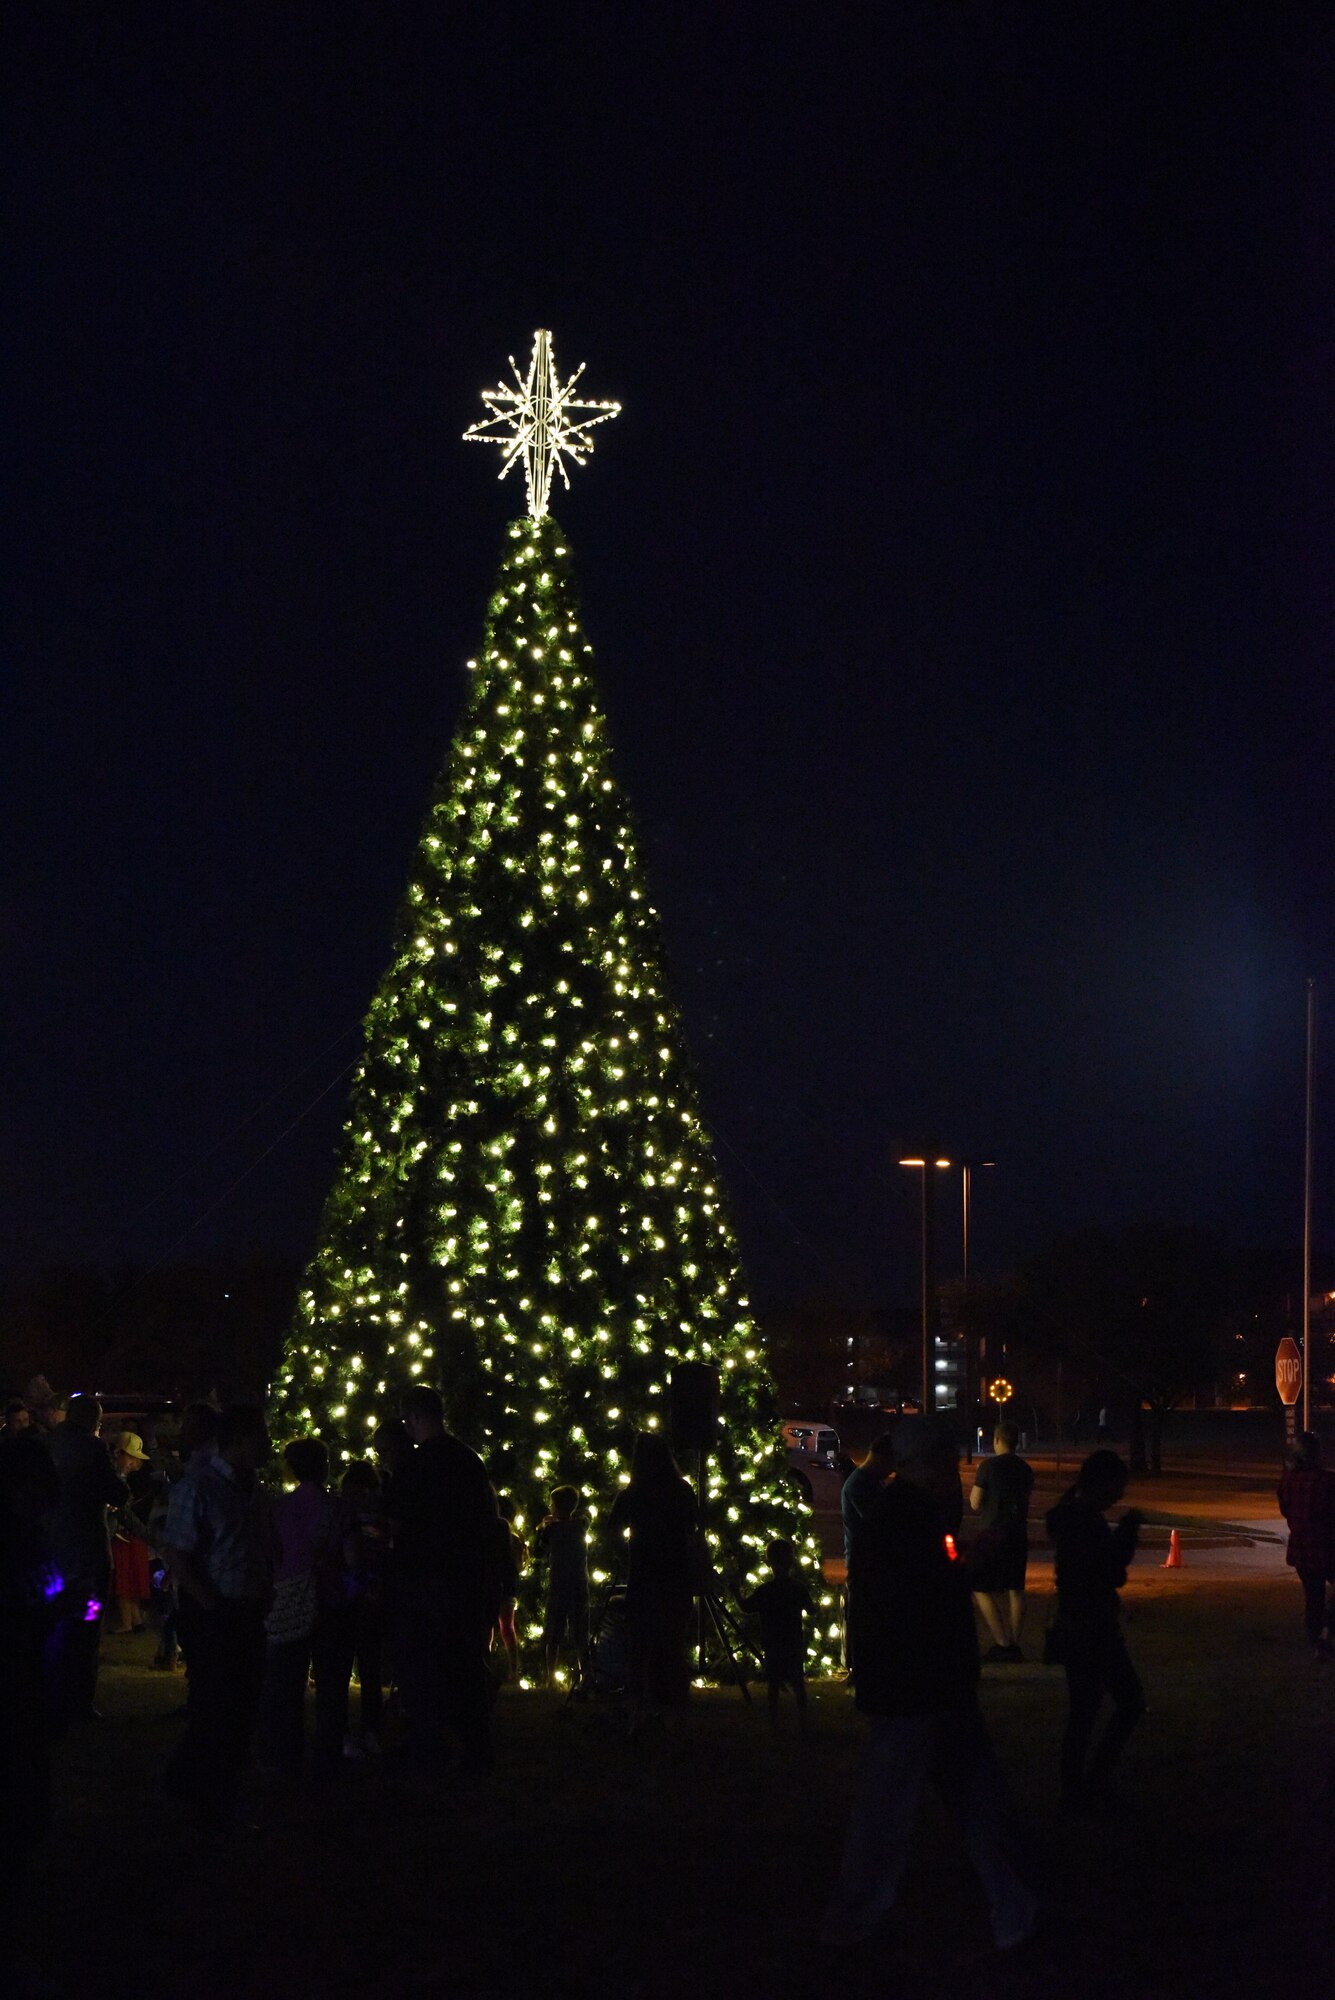 A crowd stands around the tree during the Tree Lighting Ceremony at the Parade Field on Goodfellow Air Force Base, Texas, Dec. 4, 2017. The event had activities for children such as making decorations or cookies as well as Olaf from the Disney movie Frozen, U.S. Air Force Col. Jeffrey Sorrell, 17th Training Wing vice commander, and Santa Claus.